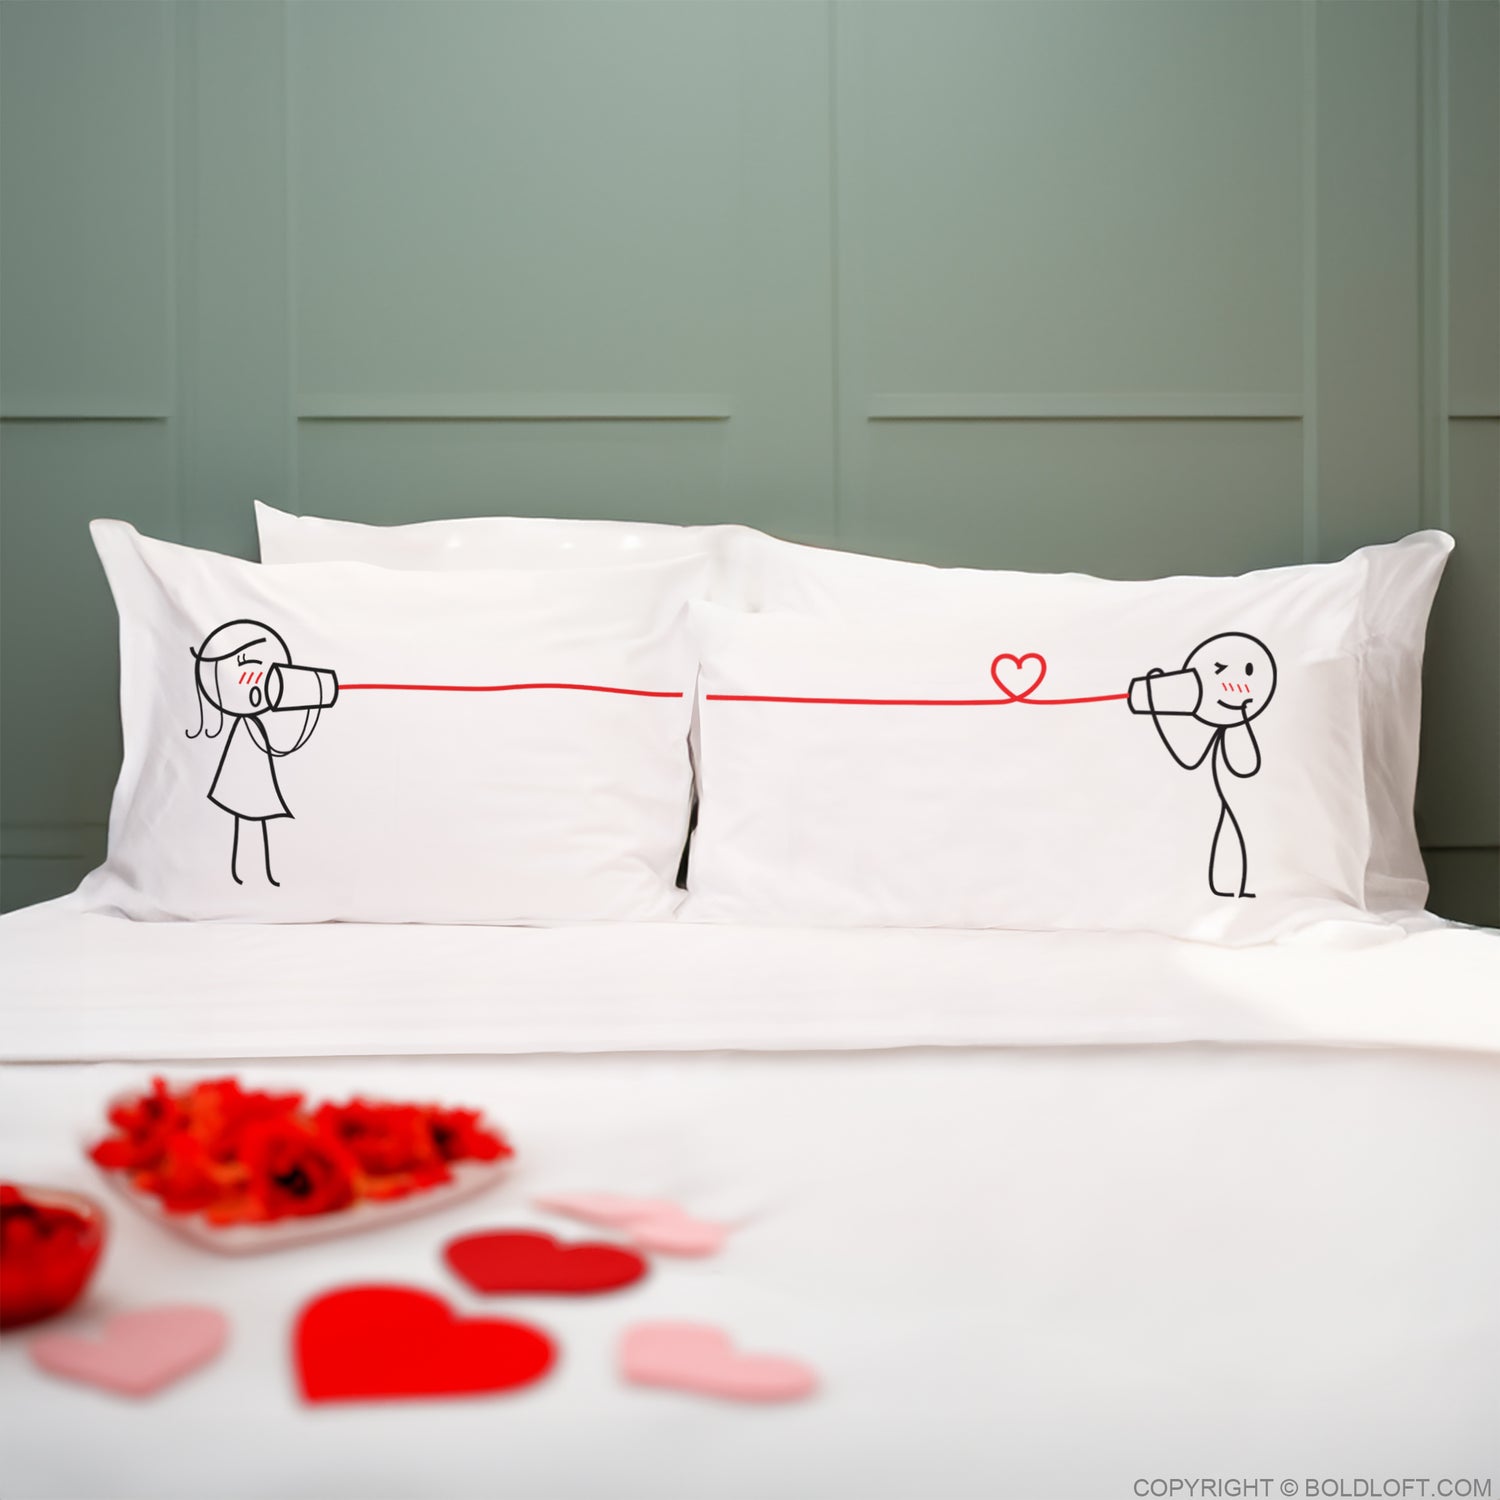 BoldLoft Say I Love You Too Couple Pillowcases, perfect couple gifts for husband and boyfriend